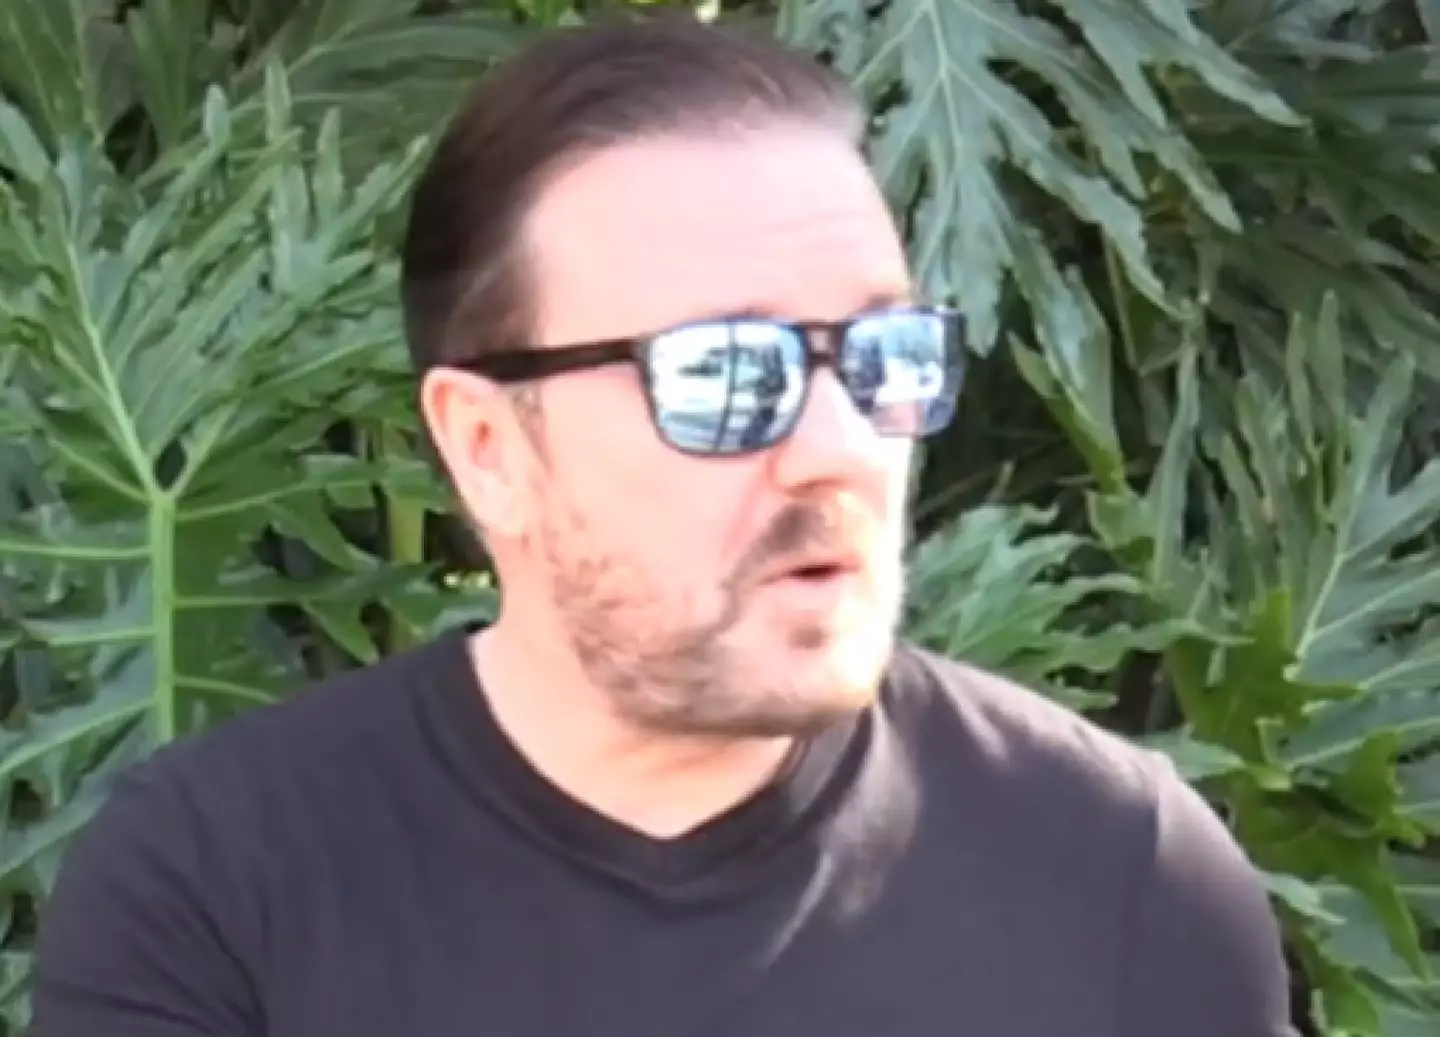 Ricky Gervais gave paparazzi a quick picture before asking them not to follow him further.